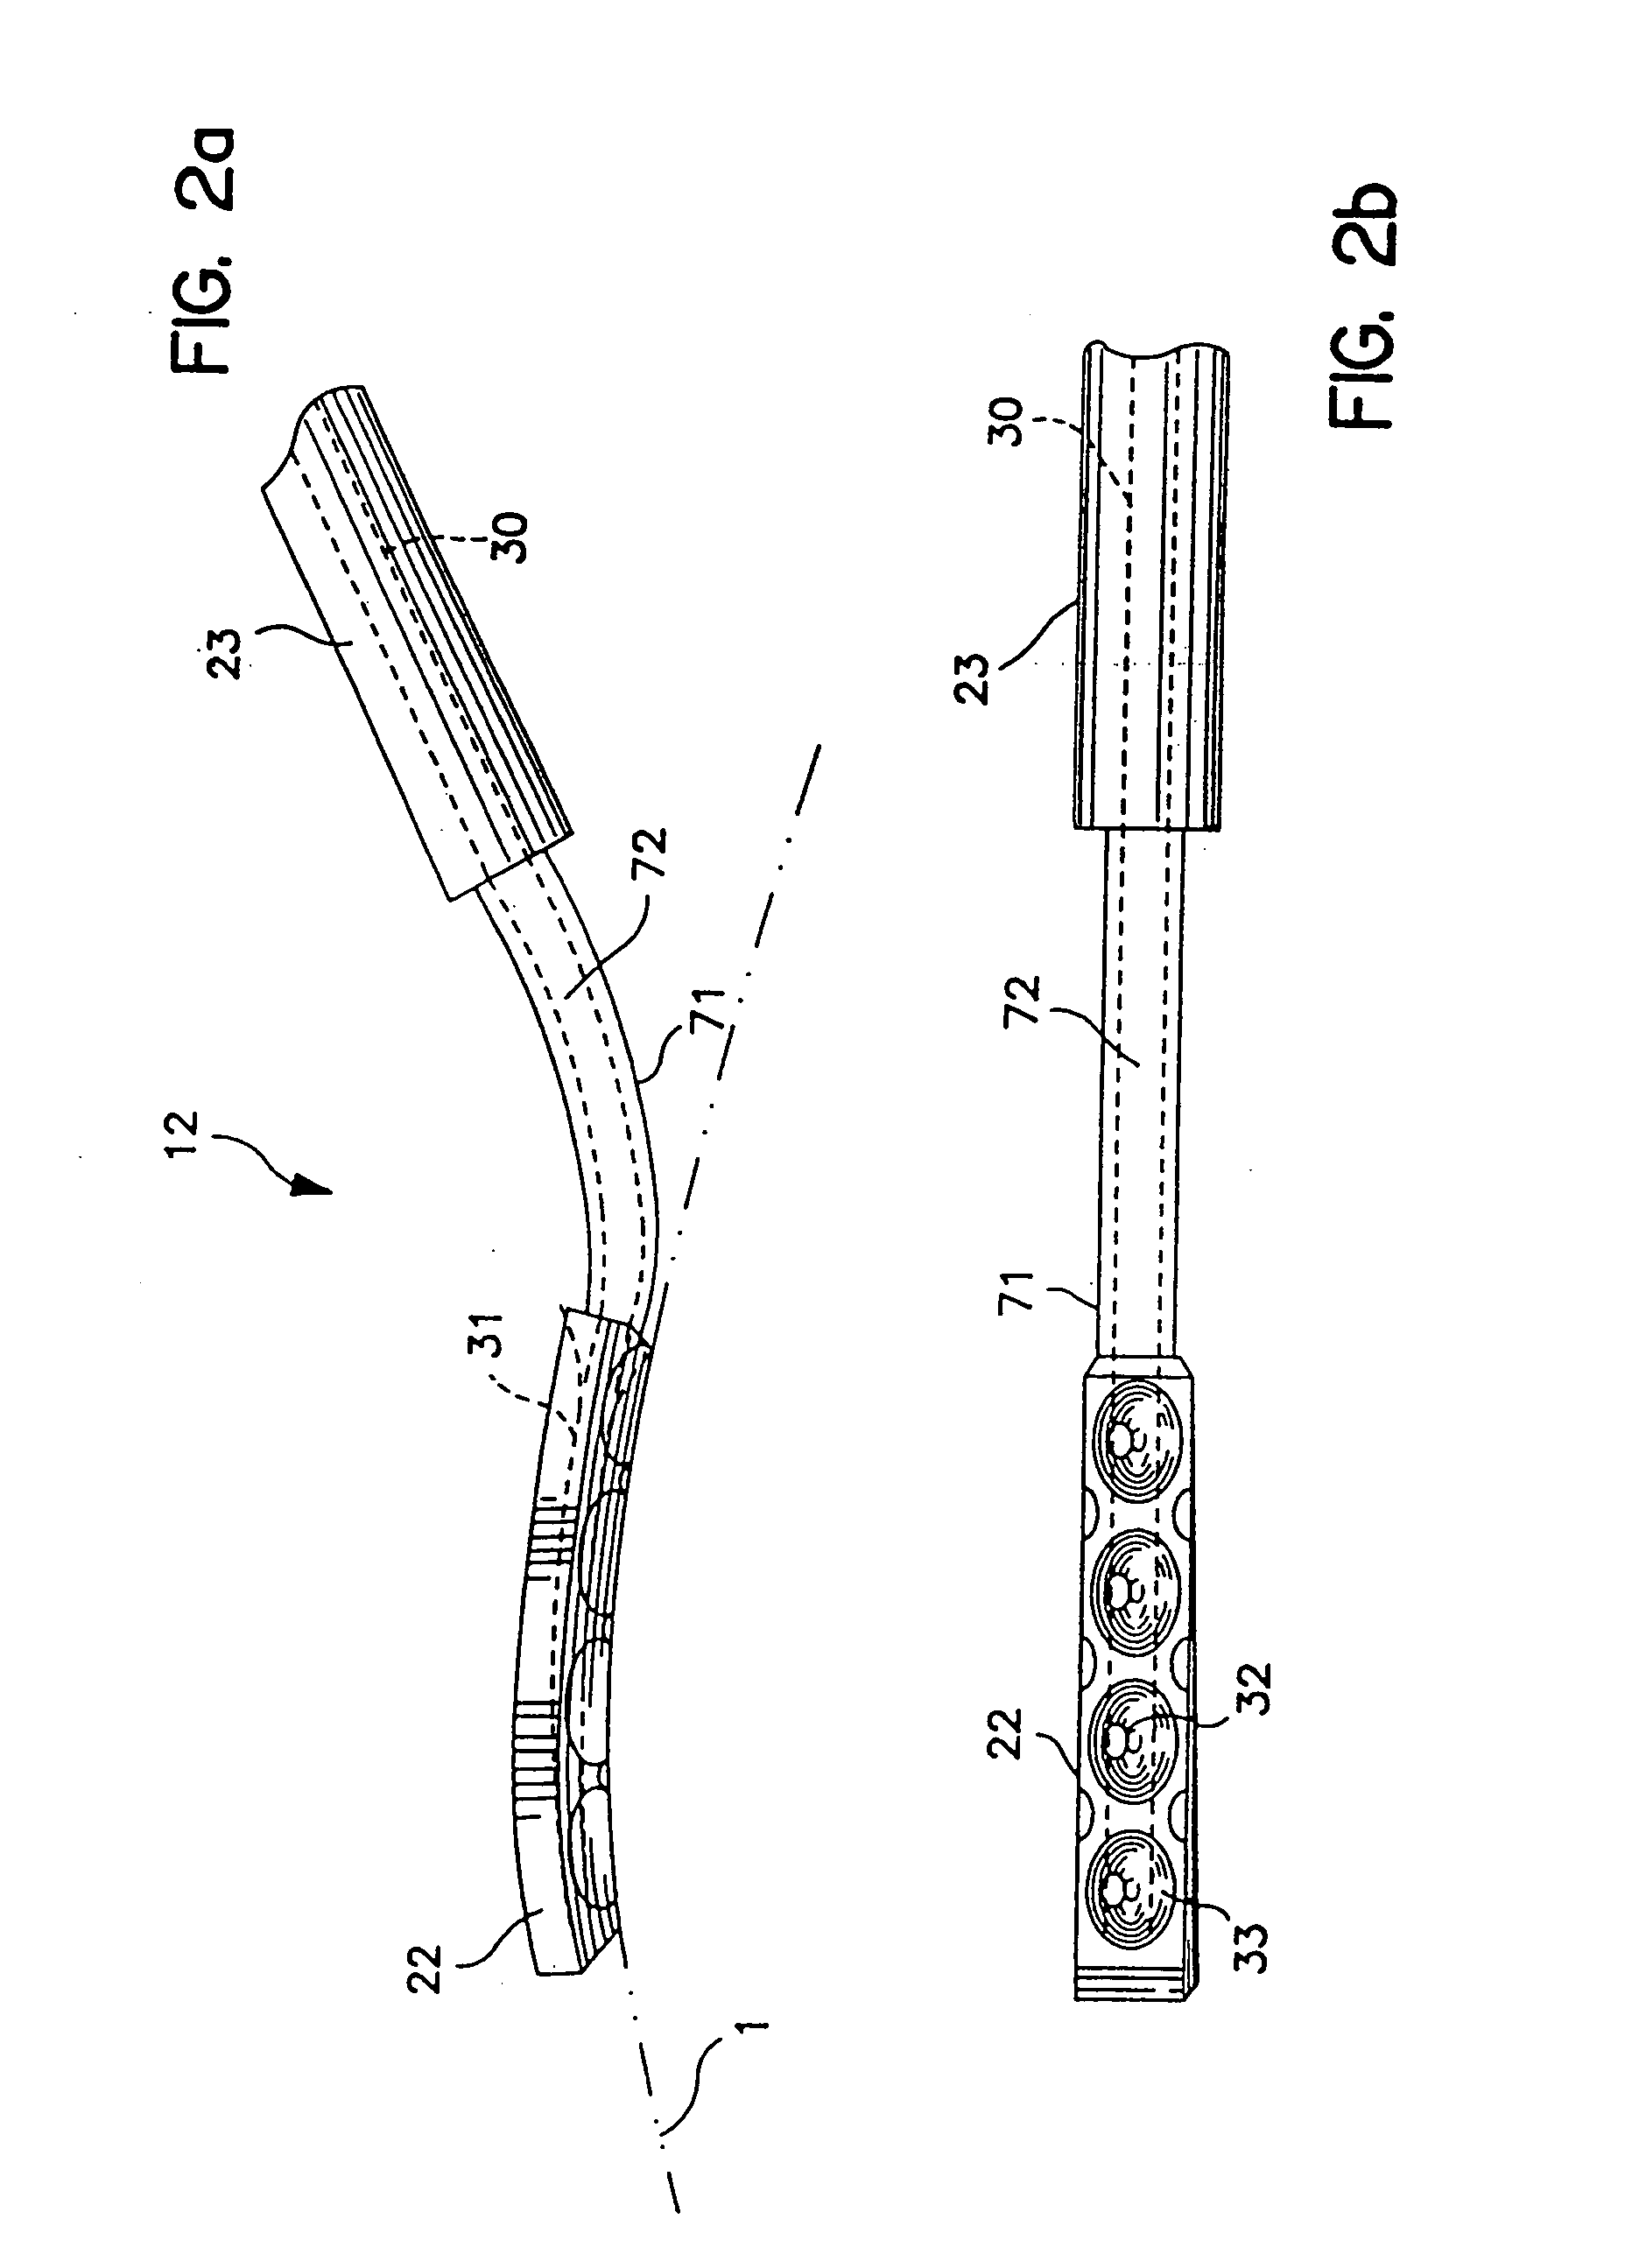 Method and apparatus for temporarily immobilizing a local area of tissue